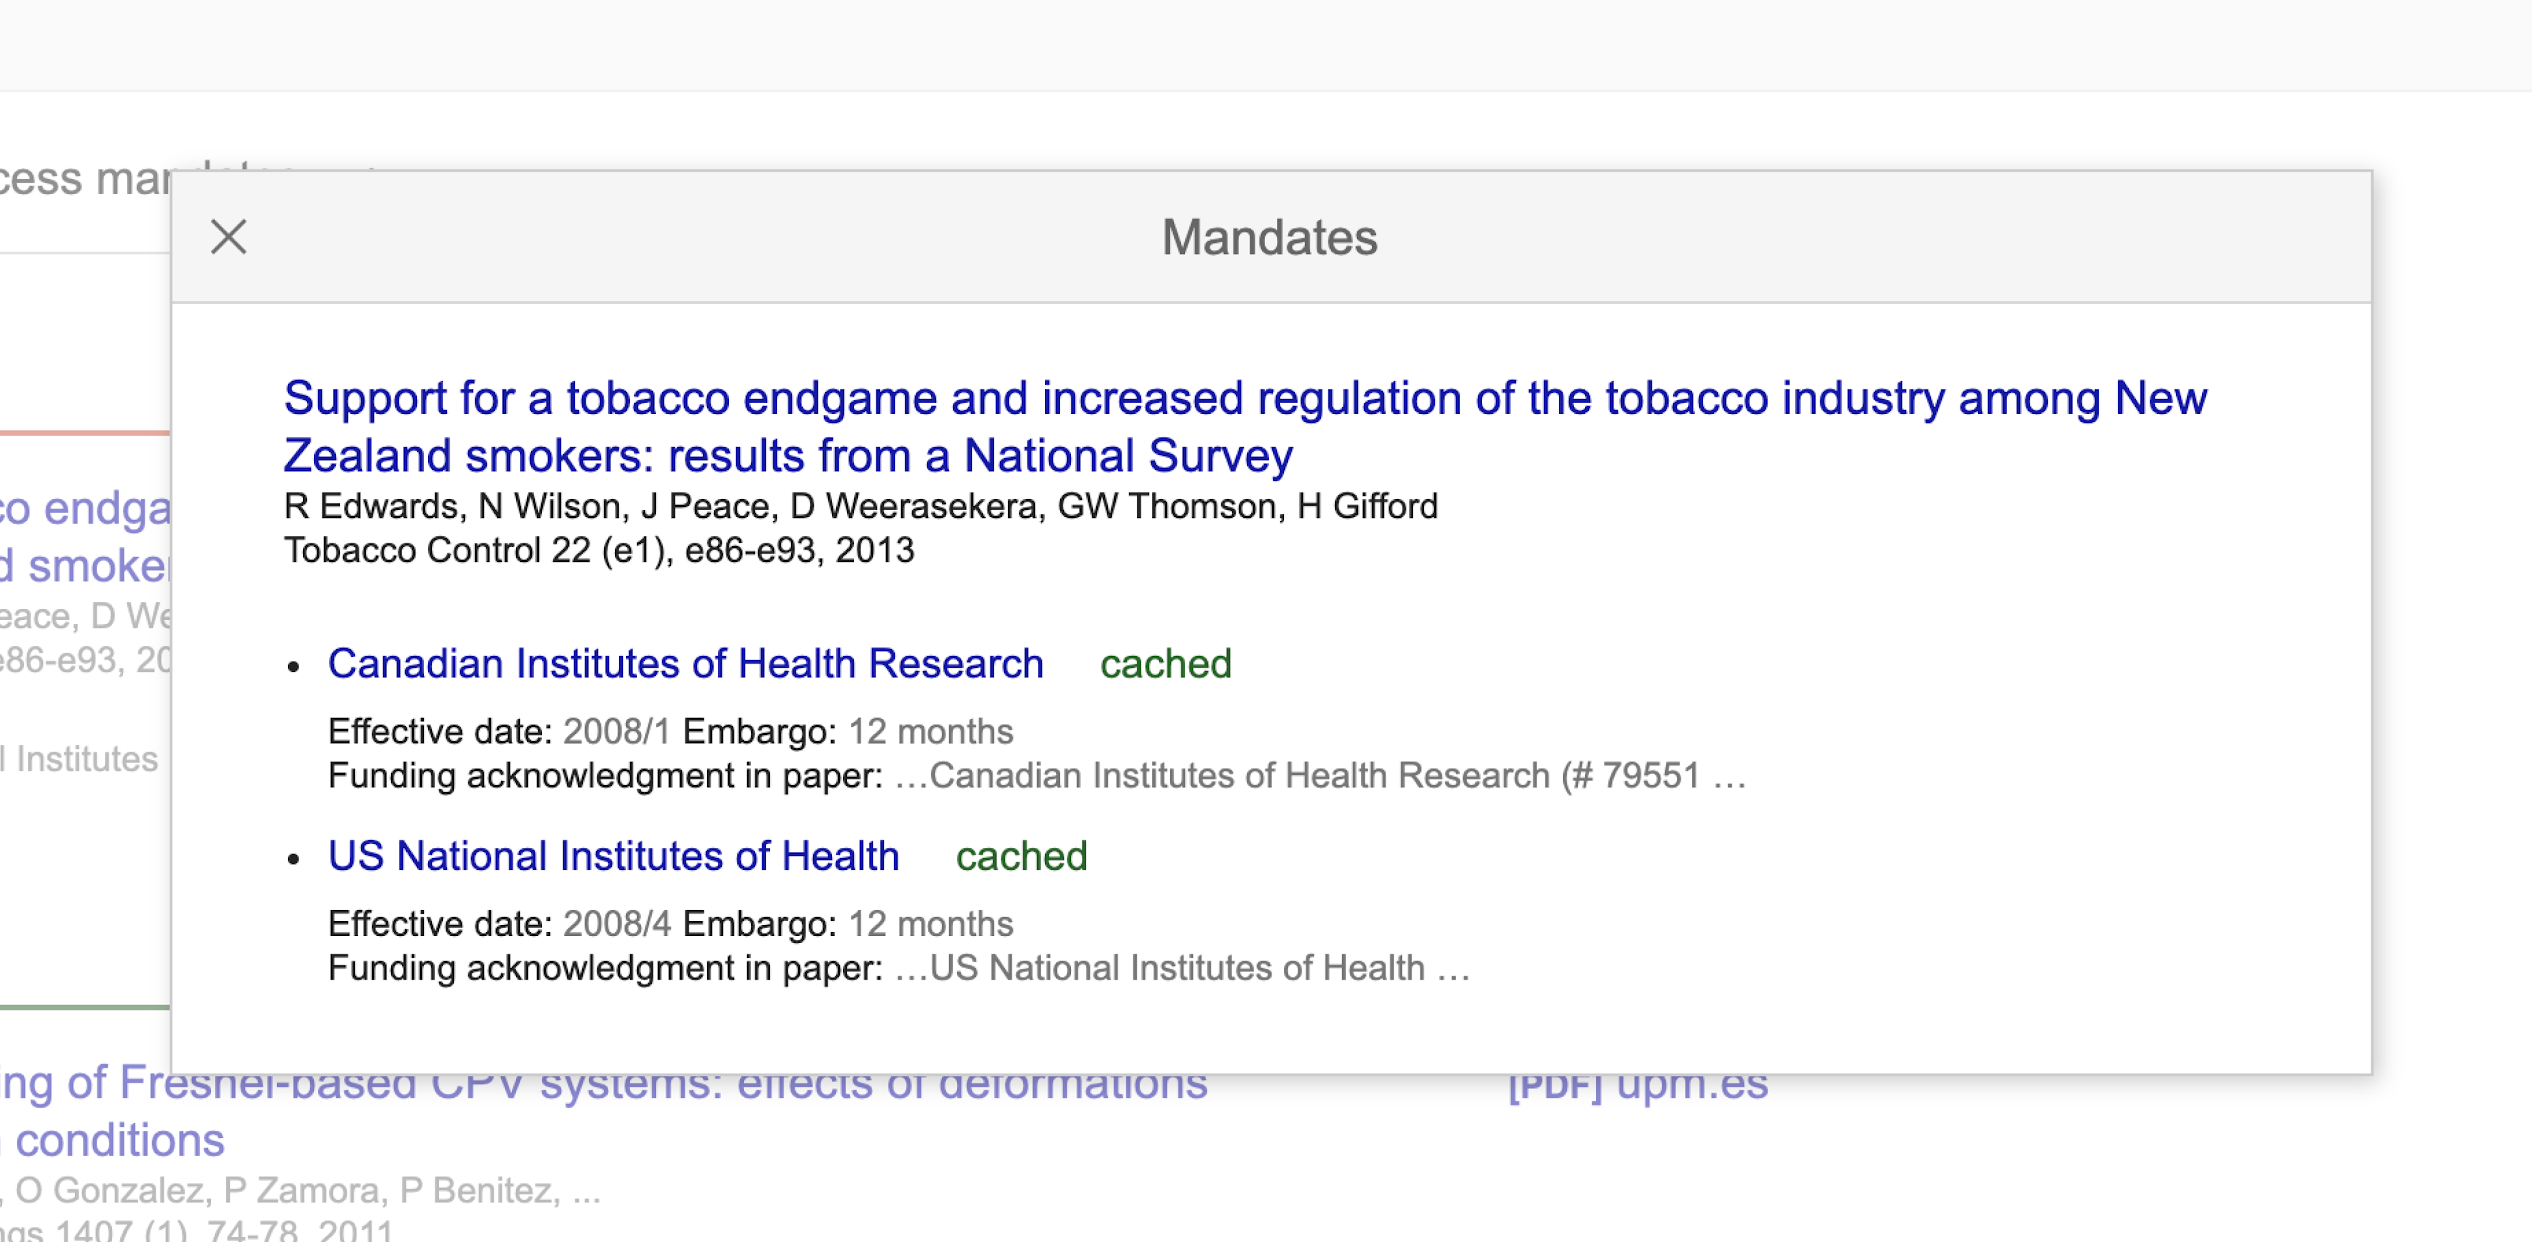 How do I get full access to articles on Google Scholar?